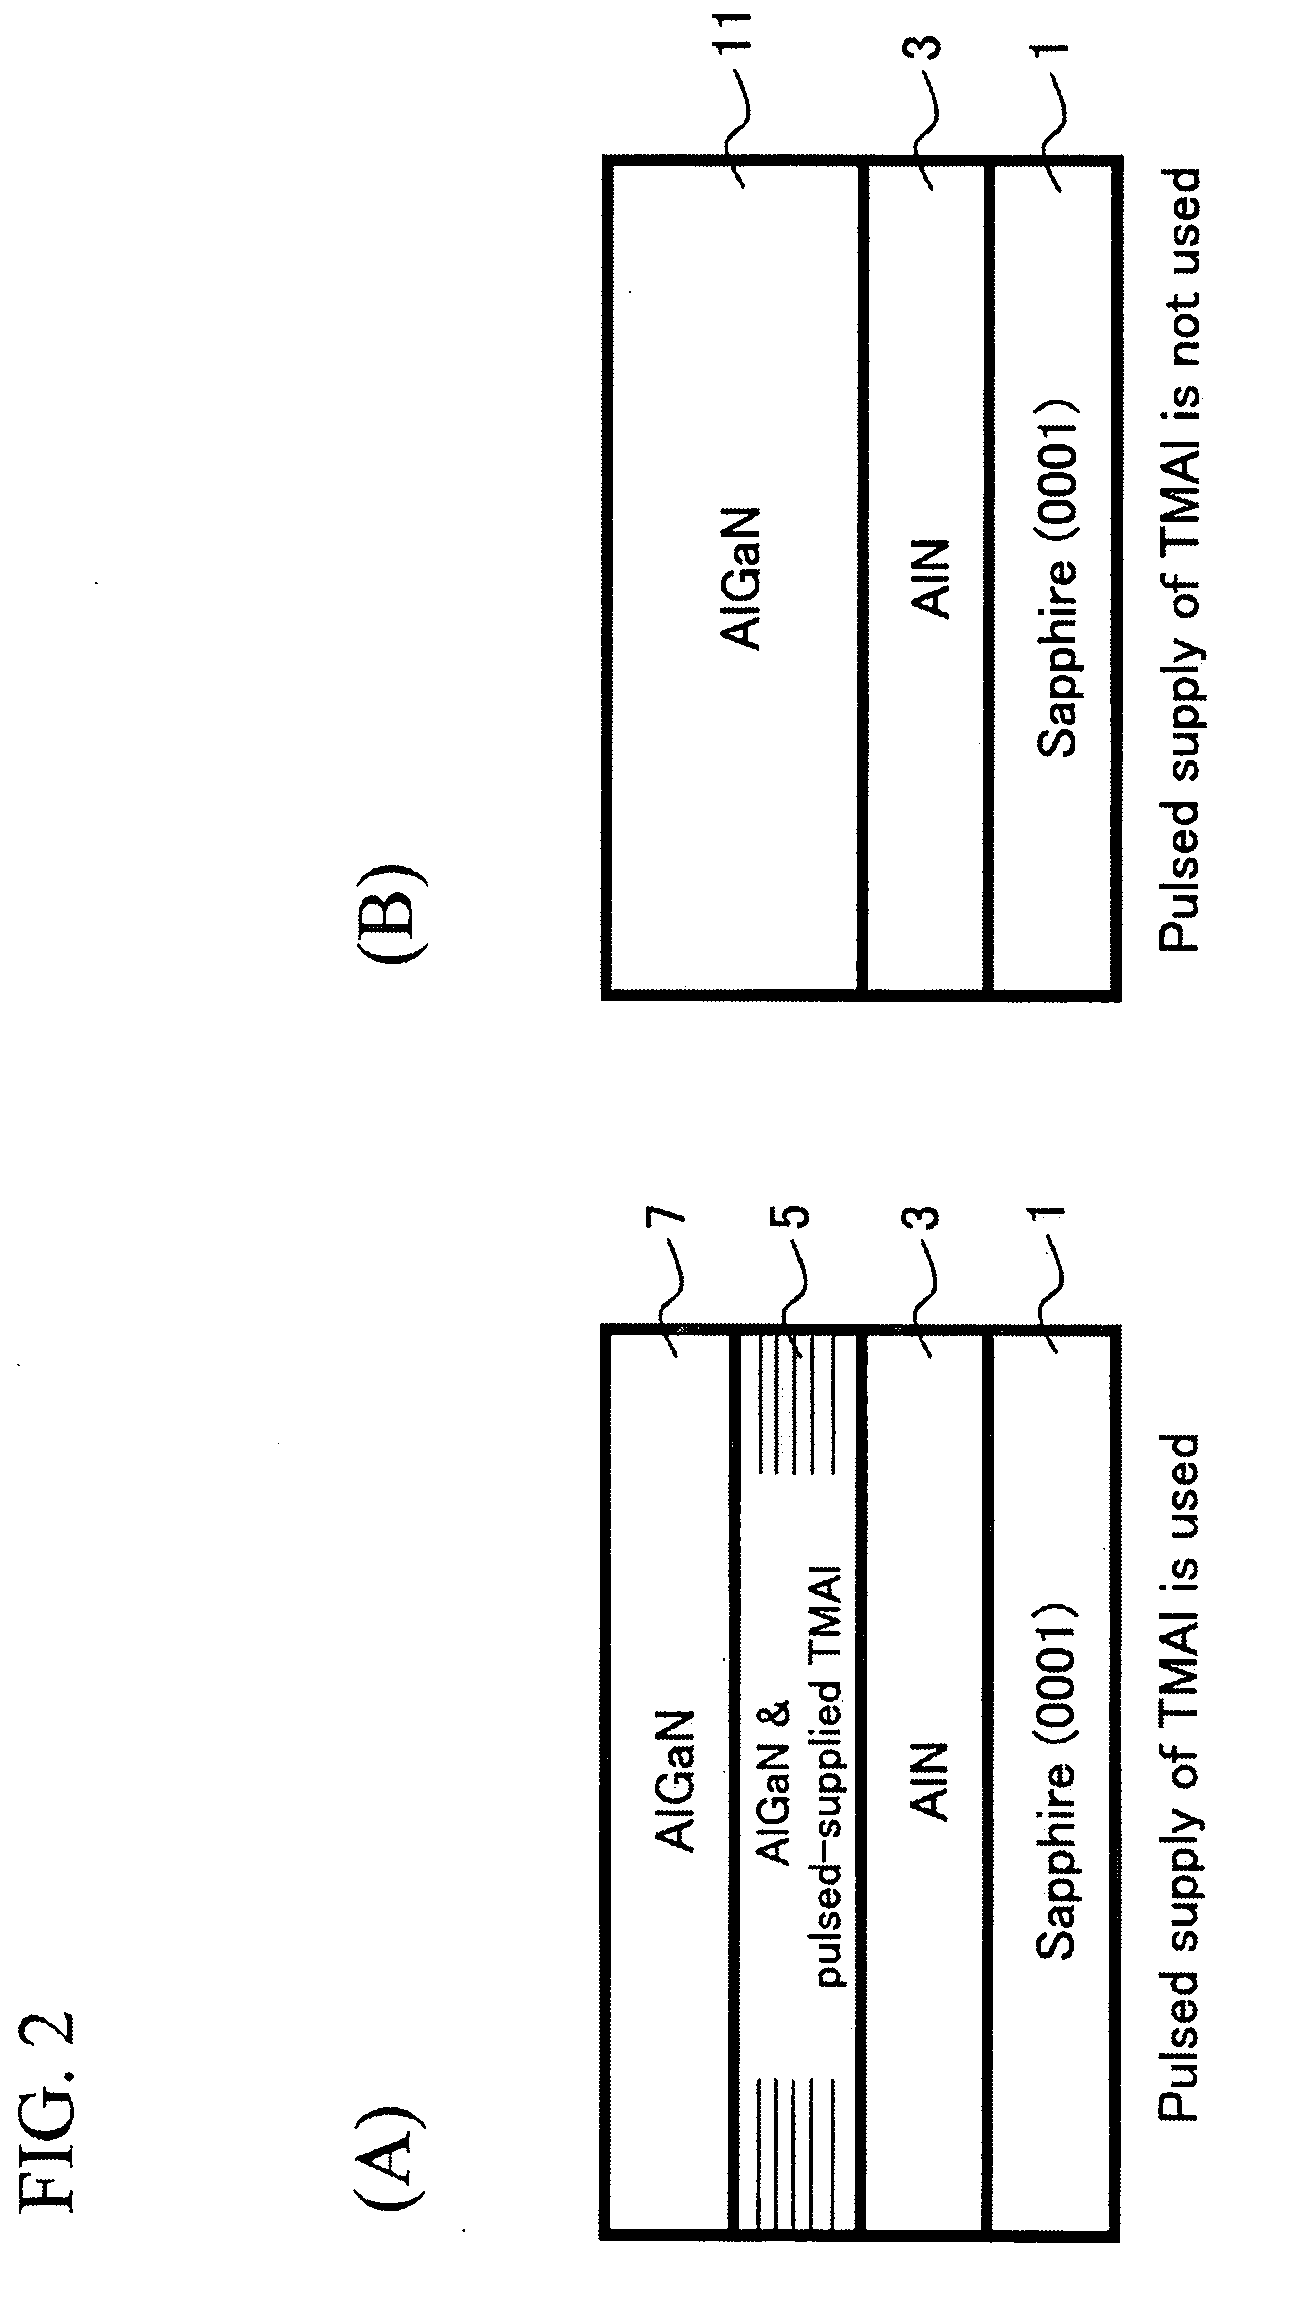 Optical semiconductor device and manufacturing method therefor